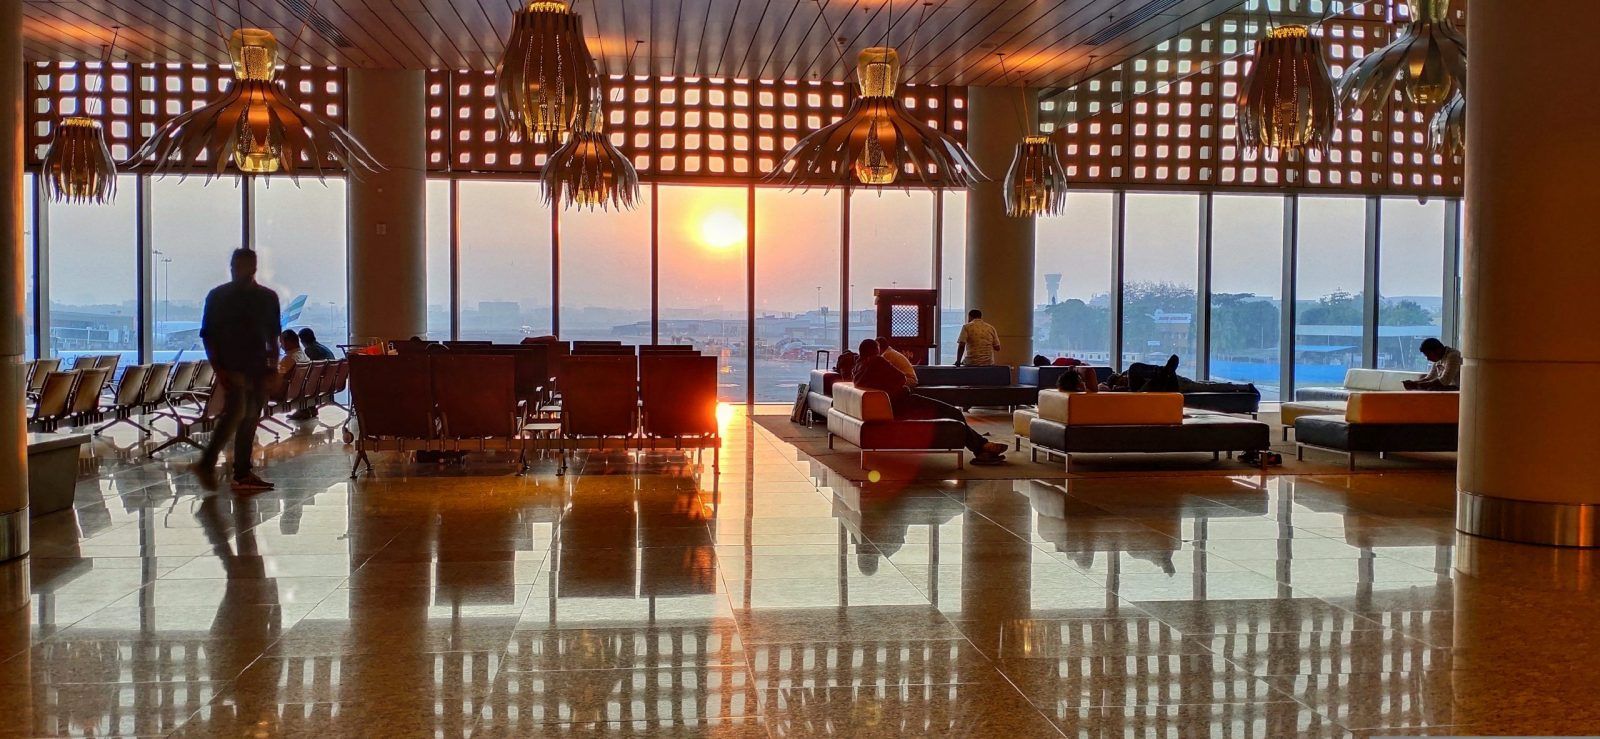 Spend some leisure time at these airport lounges while you wait to board your flight